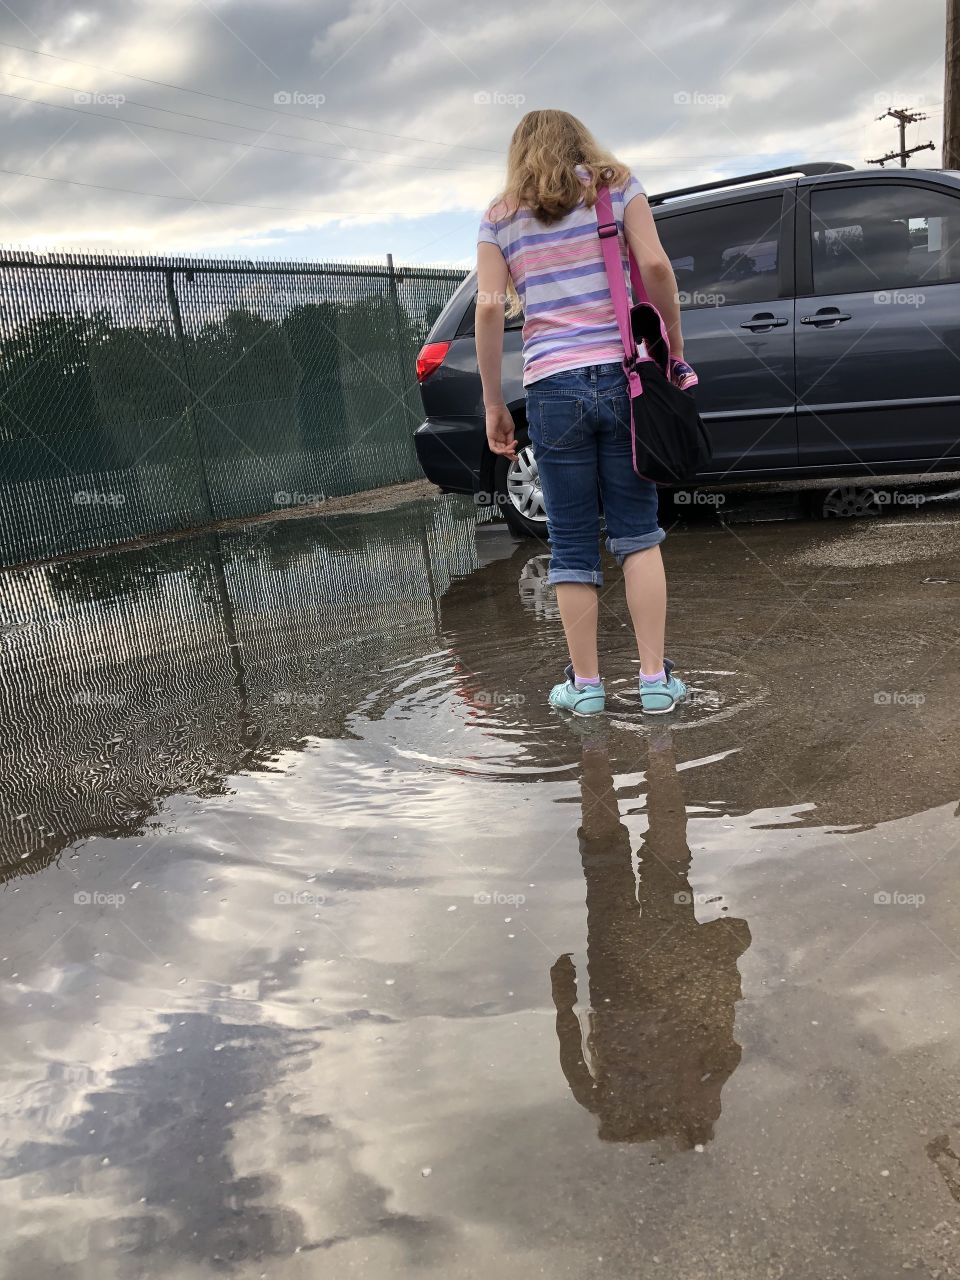 Girl in blue shoes is reflected in puddle as she wades in water with jeans rolled up